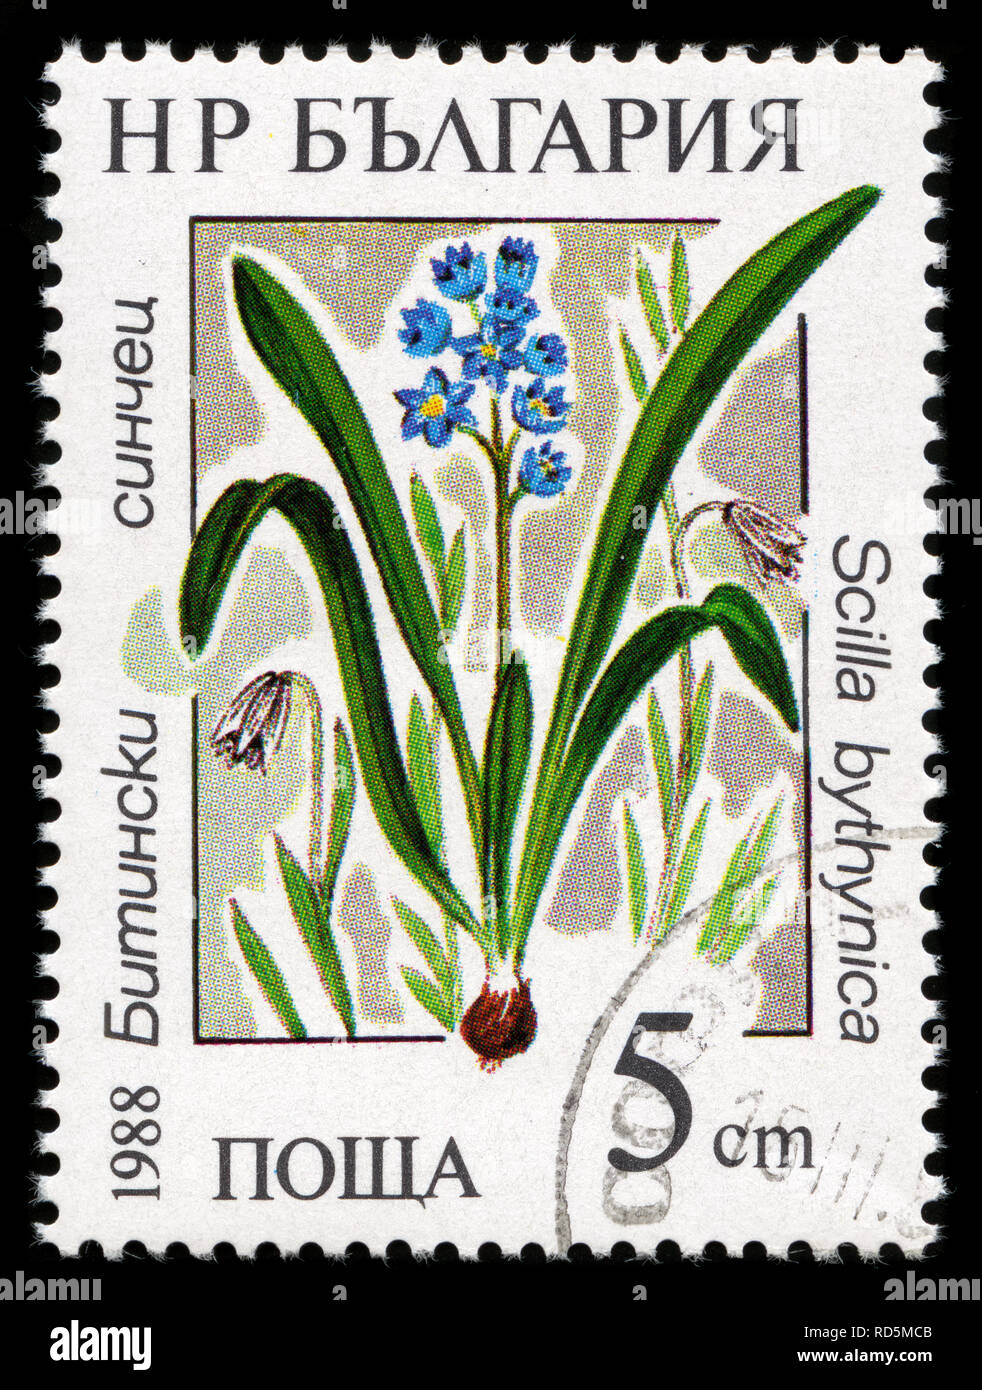 Postage stamp from Bulgaria in the Protected water plants series issued in 1988 Stock Photo